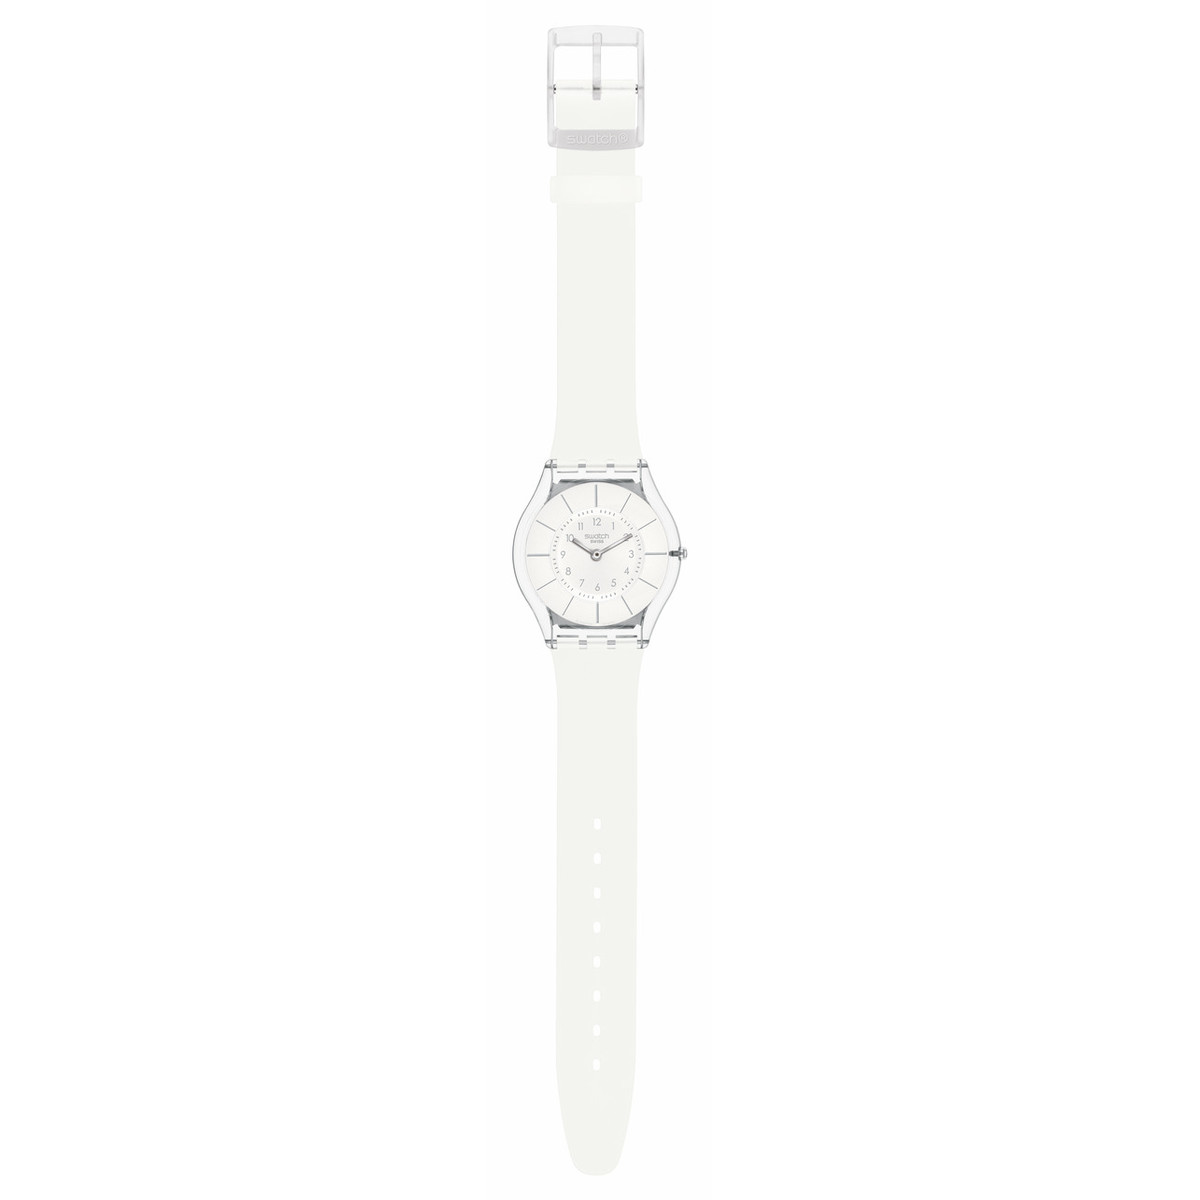 Montre SWATCH Skin classic biosourced White classiness homme bracelet silicone blanc - vue D1